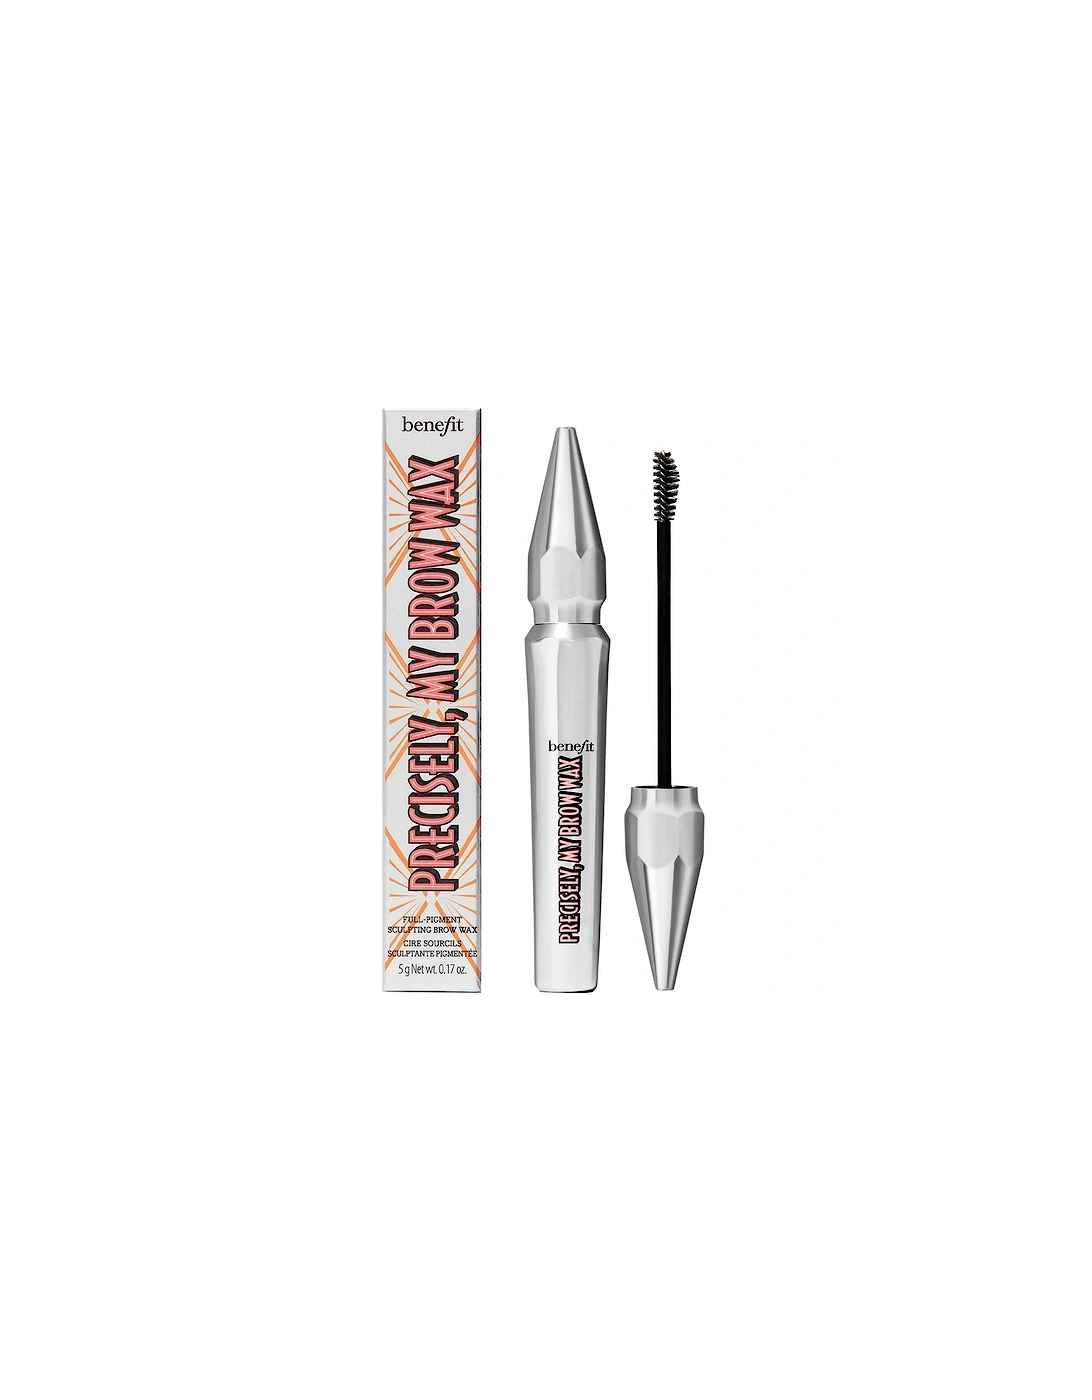 Precisely My Brow Full Pigment Sculpting Brow Wax - 1 Cool Light Blonde, 2 of 1